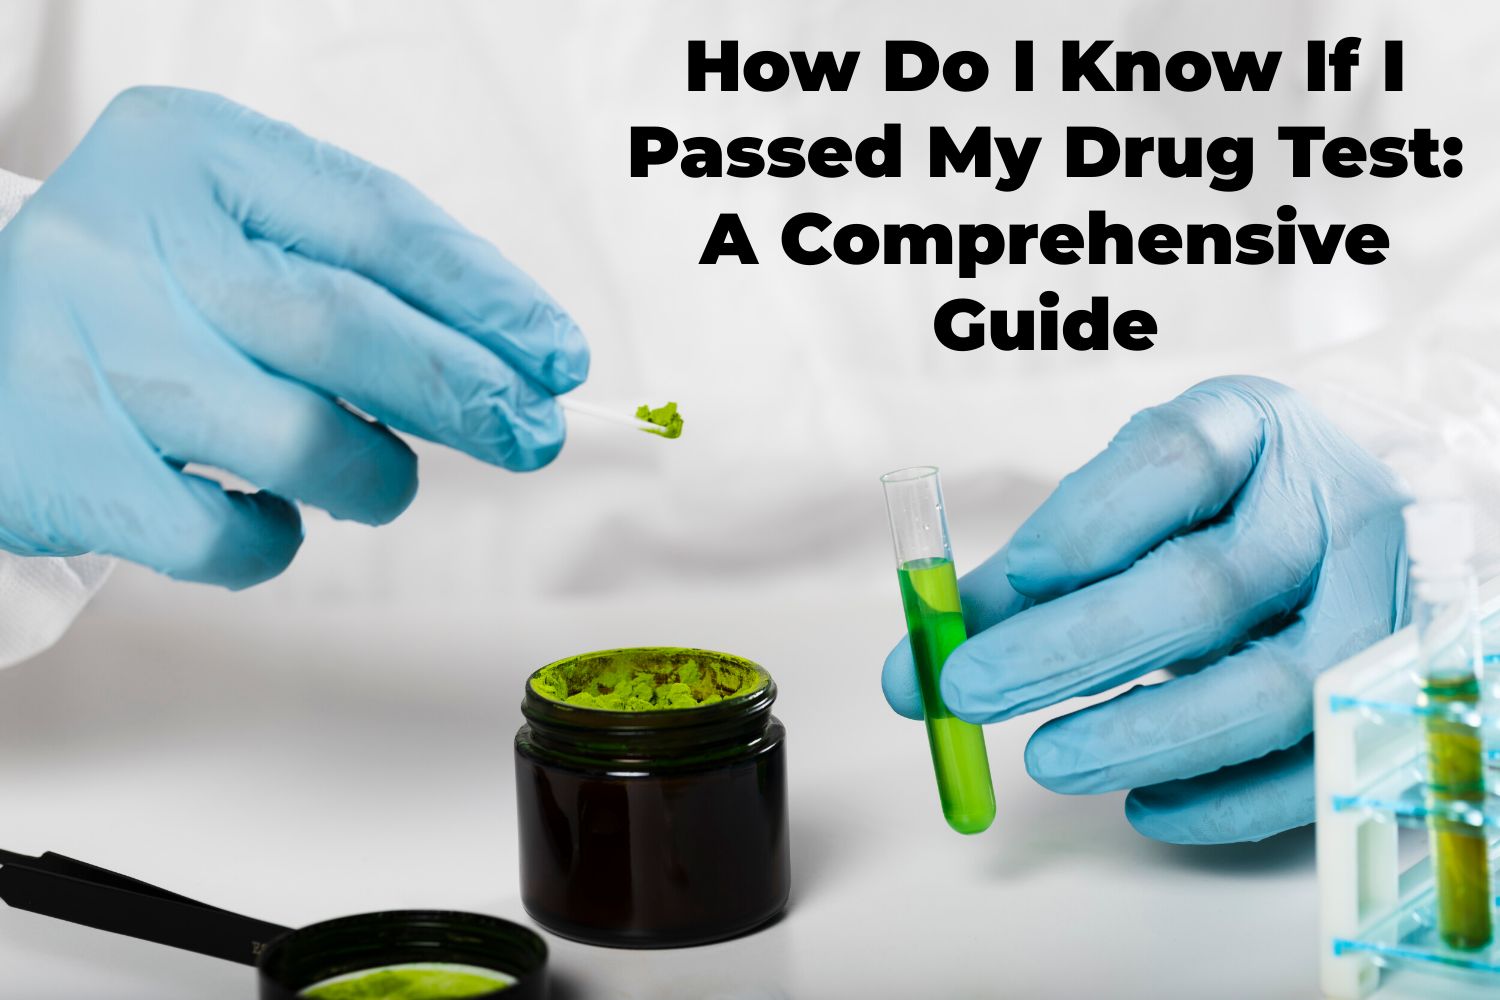 How Do I Know If I Passed My Drug Test